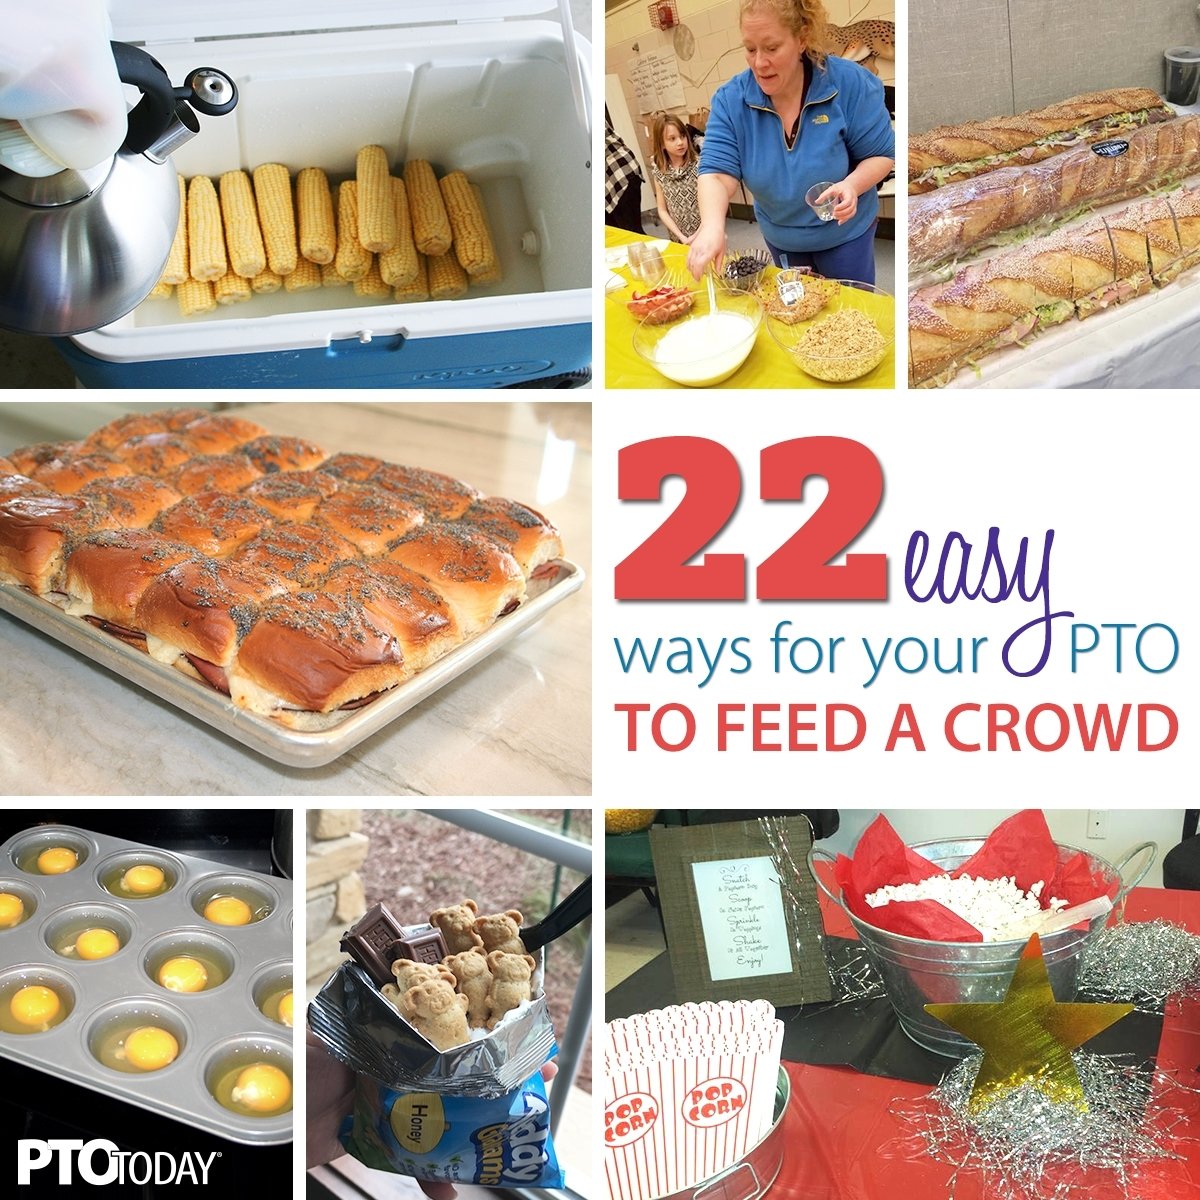 10 Wonderful Menu Ideas For A Crowd 22 easy meal ideas for large groups pto today 3 2022